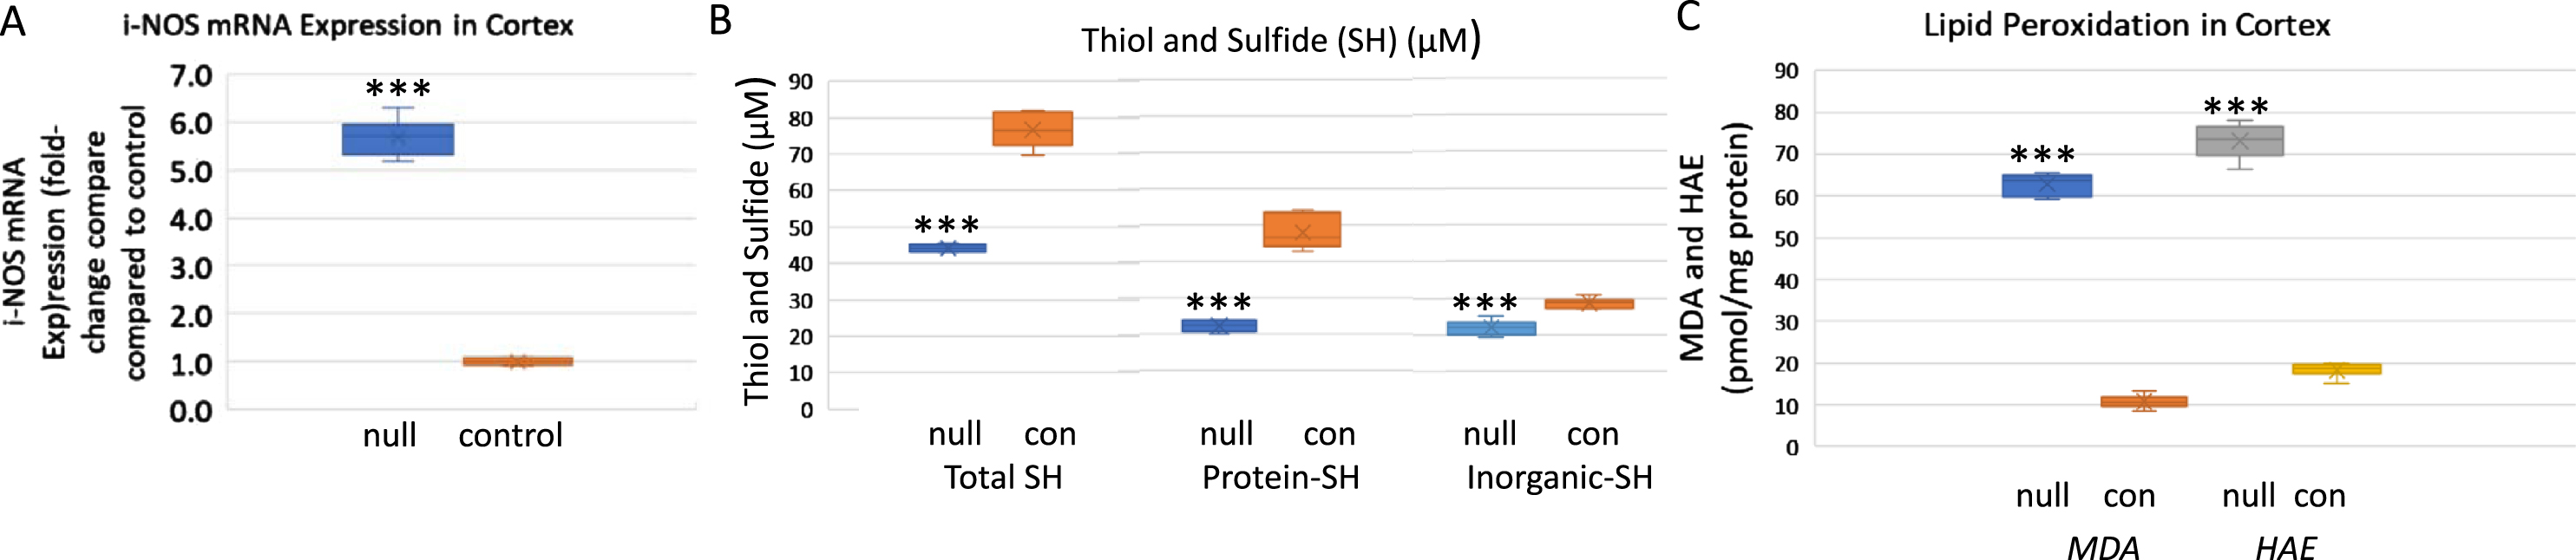 Inducible nitric oxide synthase, total thiols, and products of lipid peroxidation are increased in the cortex of ARSB-null mice. A) Inducible nitric oxide synthase (iNOS) expression was markedly increased in the ARSB-null mice (5.68±0.39 versus 1.04±0.08, n = 6; p < 0.001, two sample t-test, two-tailed, unequal variance). B) Total thiols, including protein-thiol groups and inorganic SH groups were lower in the ARSB-null mice than the controls (71.6±4.9 versus 44.1±1.0; n = 6, p < 0.001), consistent with lower reducing capacity in the ARSB-null mice. C) The lipid peroxidation products, MDA and HAE, were measured in the cortical tissue of the ARSB-null and control mice. In the ARSB-null mouse tissue, levels are several-fold higher (n = 6, p < 0.001). con, control; HAE, 4-hydroxyalkenals; MDA, malondialdehyde; null, ARSB-null; SH, sulfhydryl.